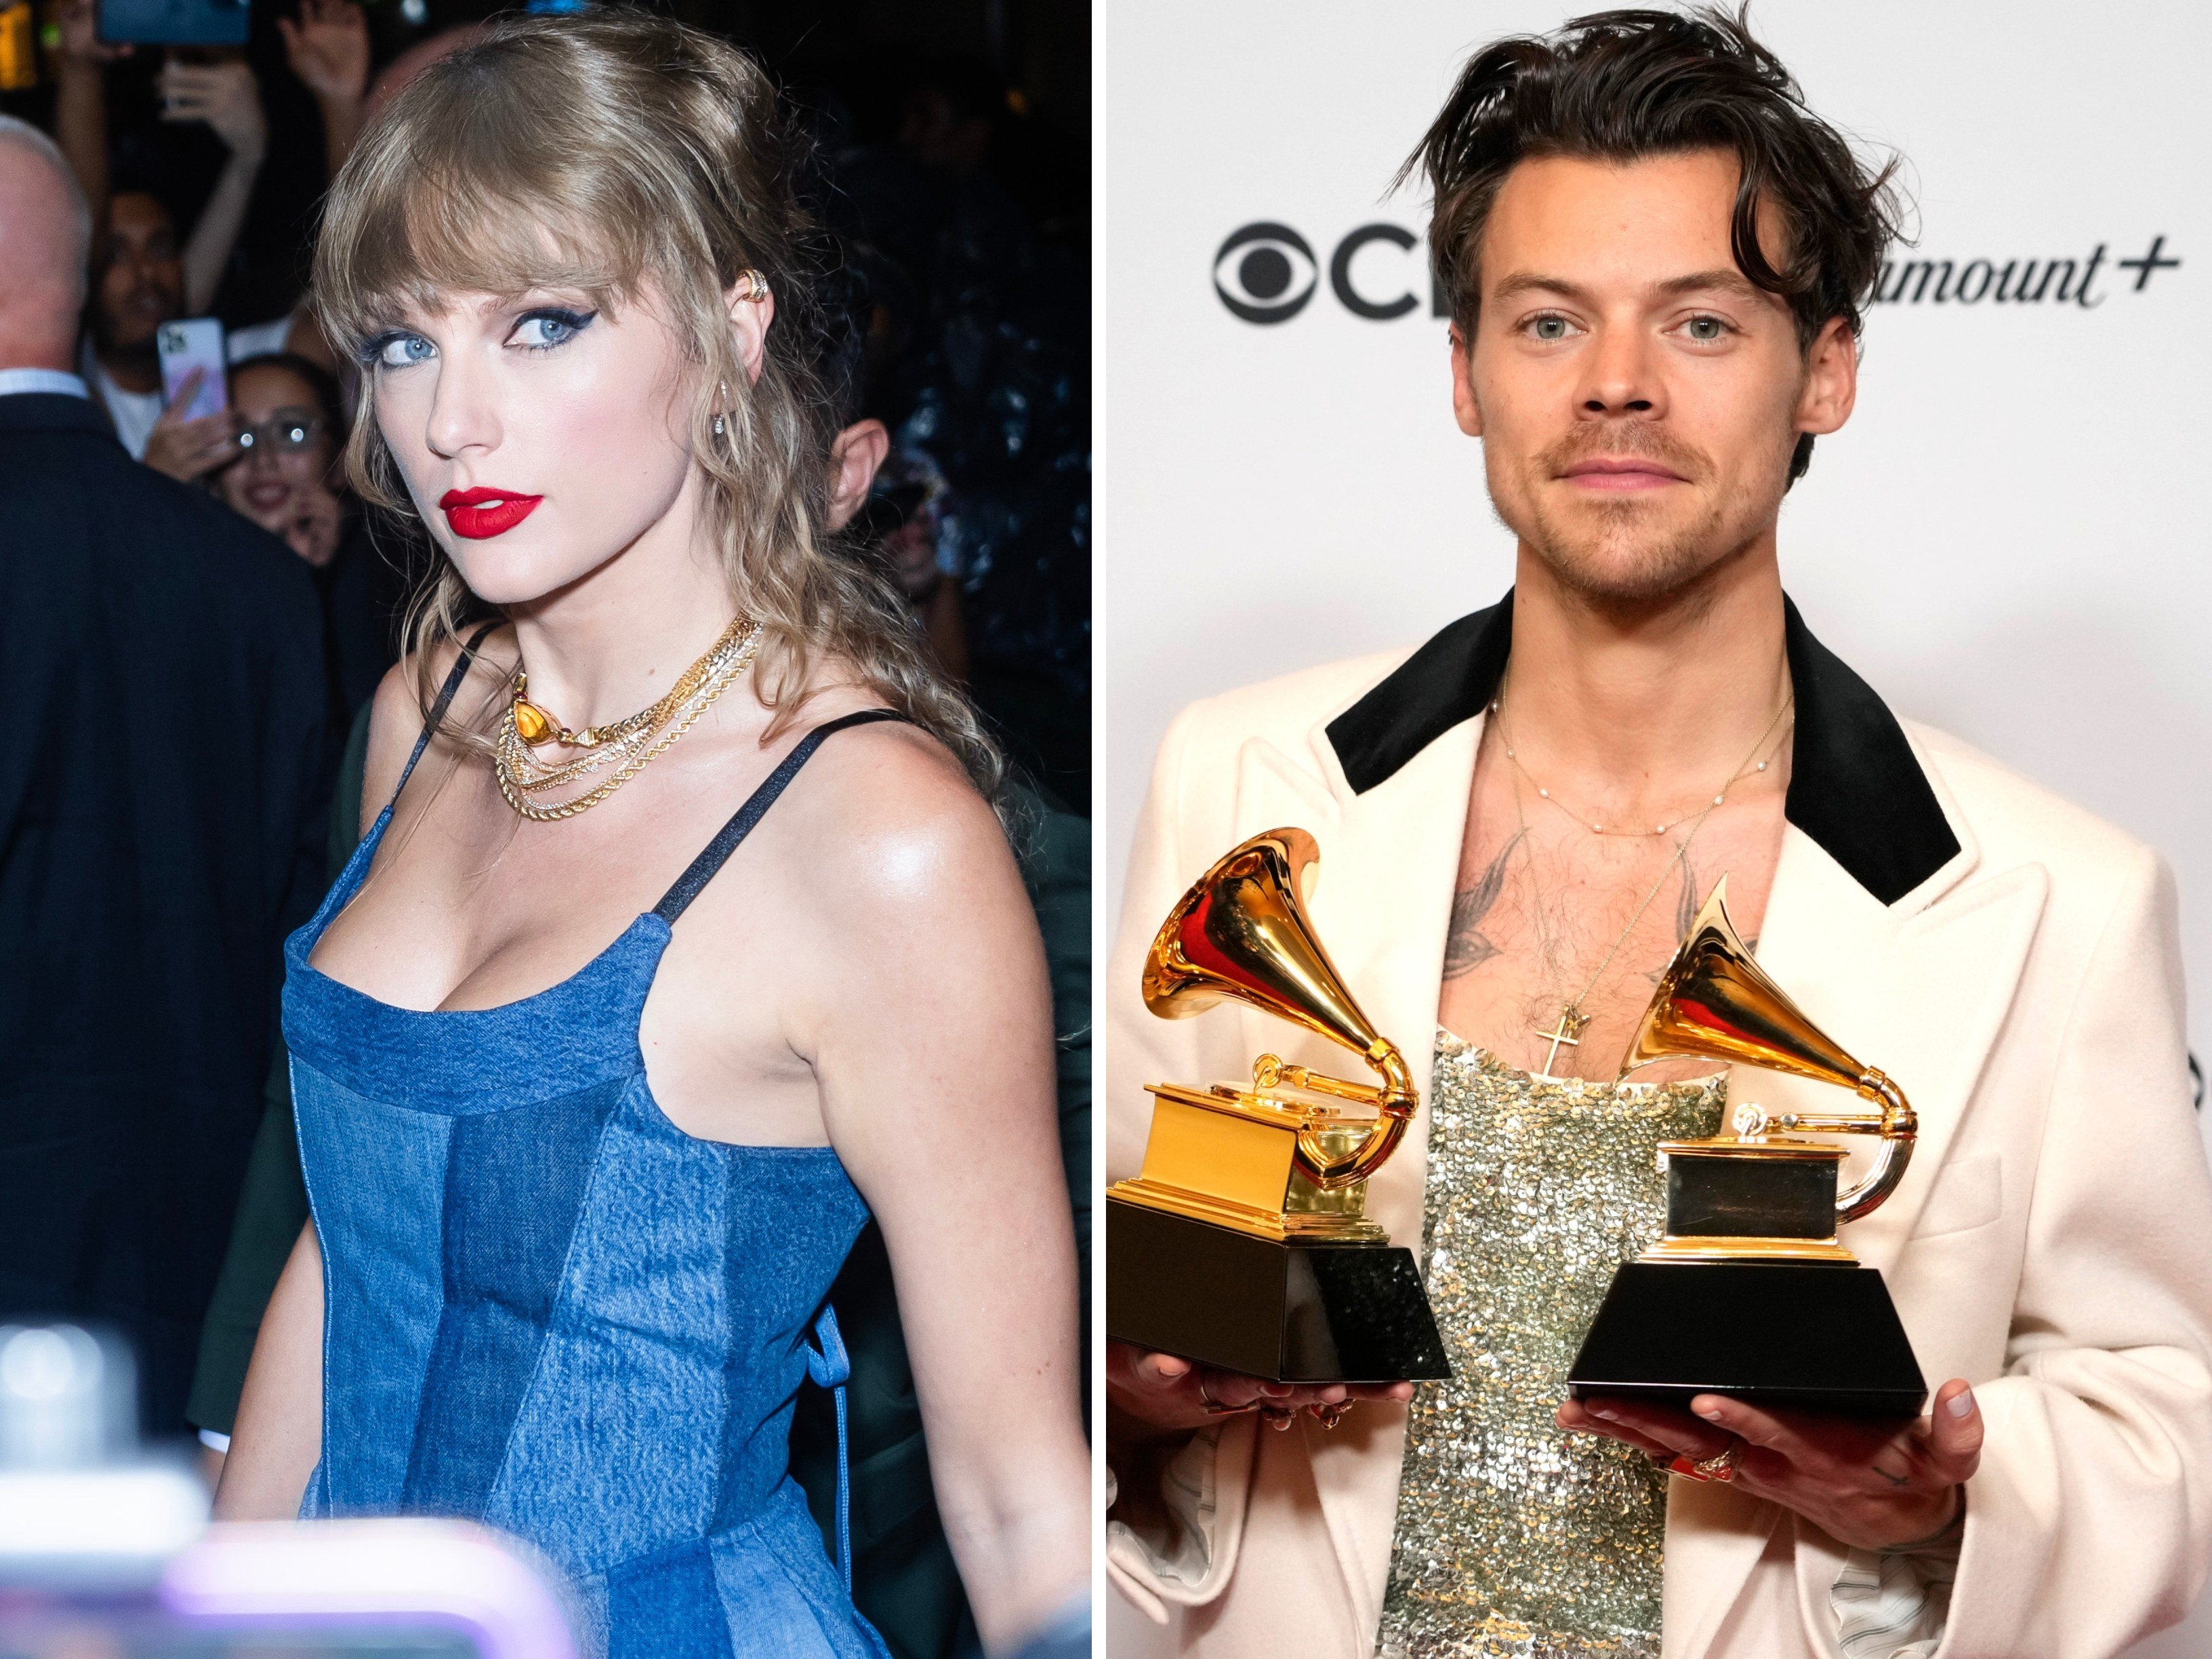 Taylor Swift and Harry Styles dated for only a couple of months – but their short-lived romance still resonates. Photos: Getty Images, AP